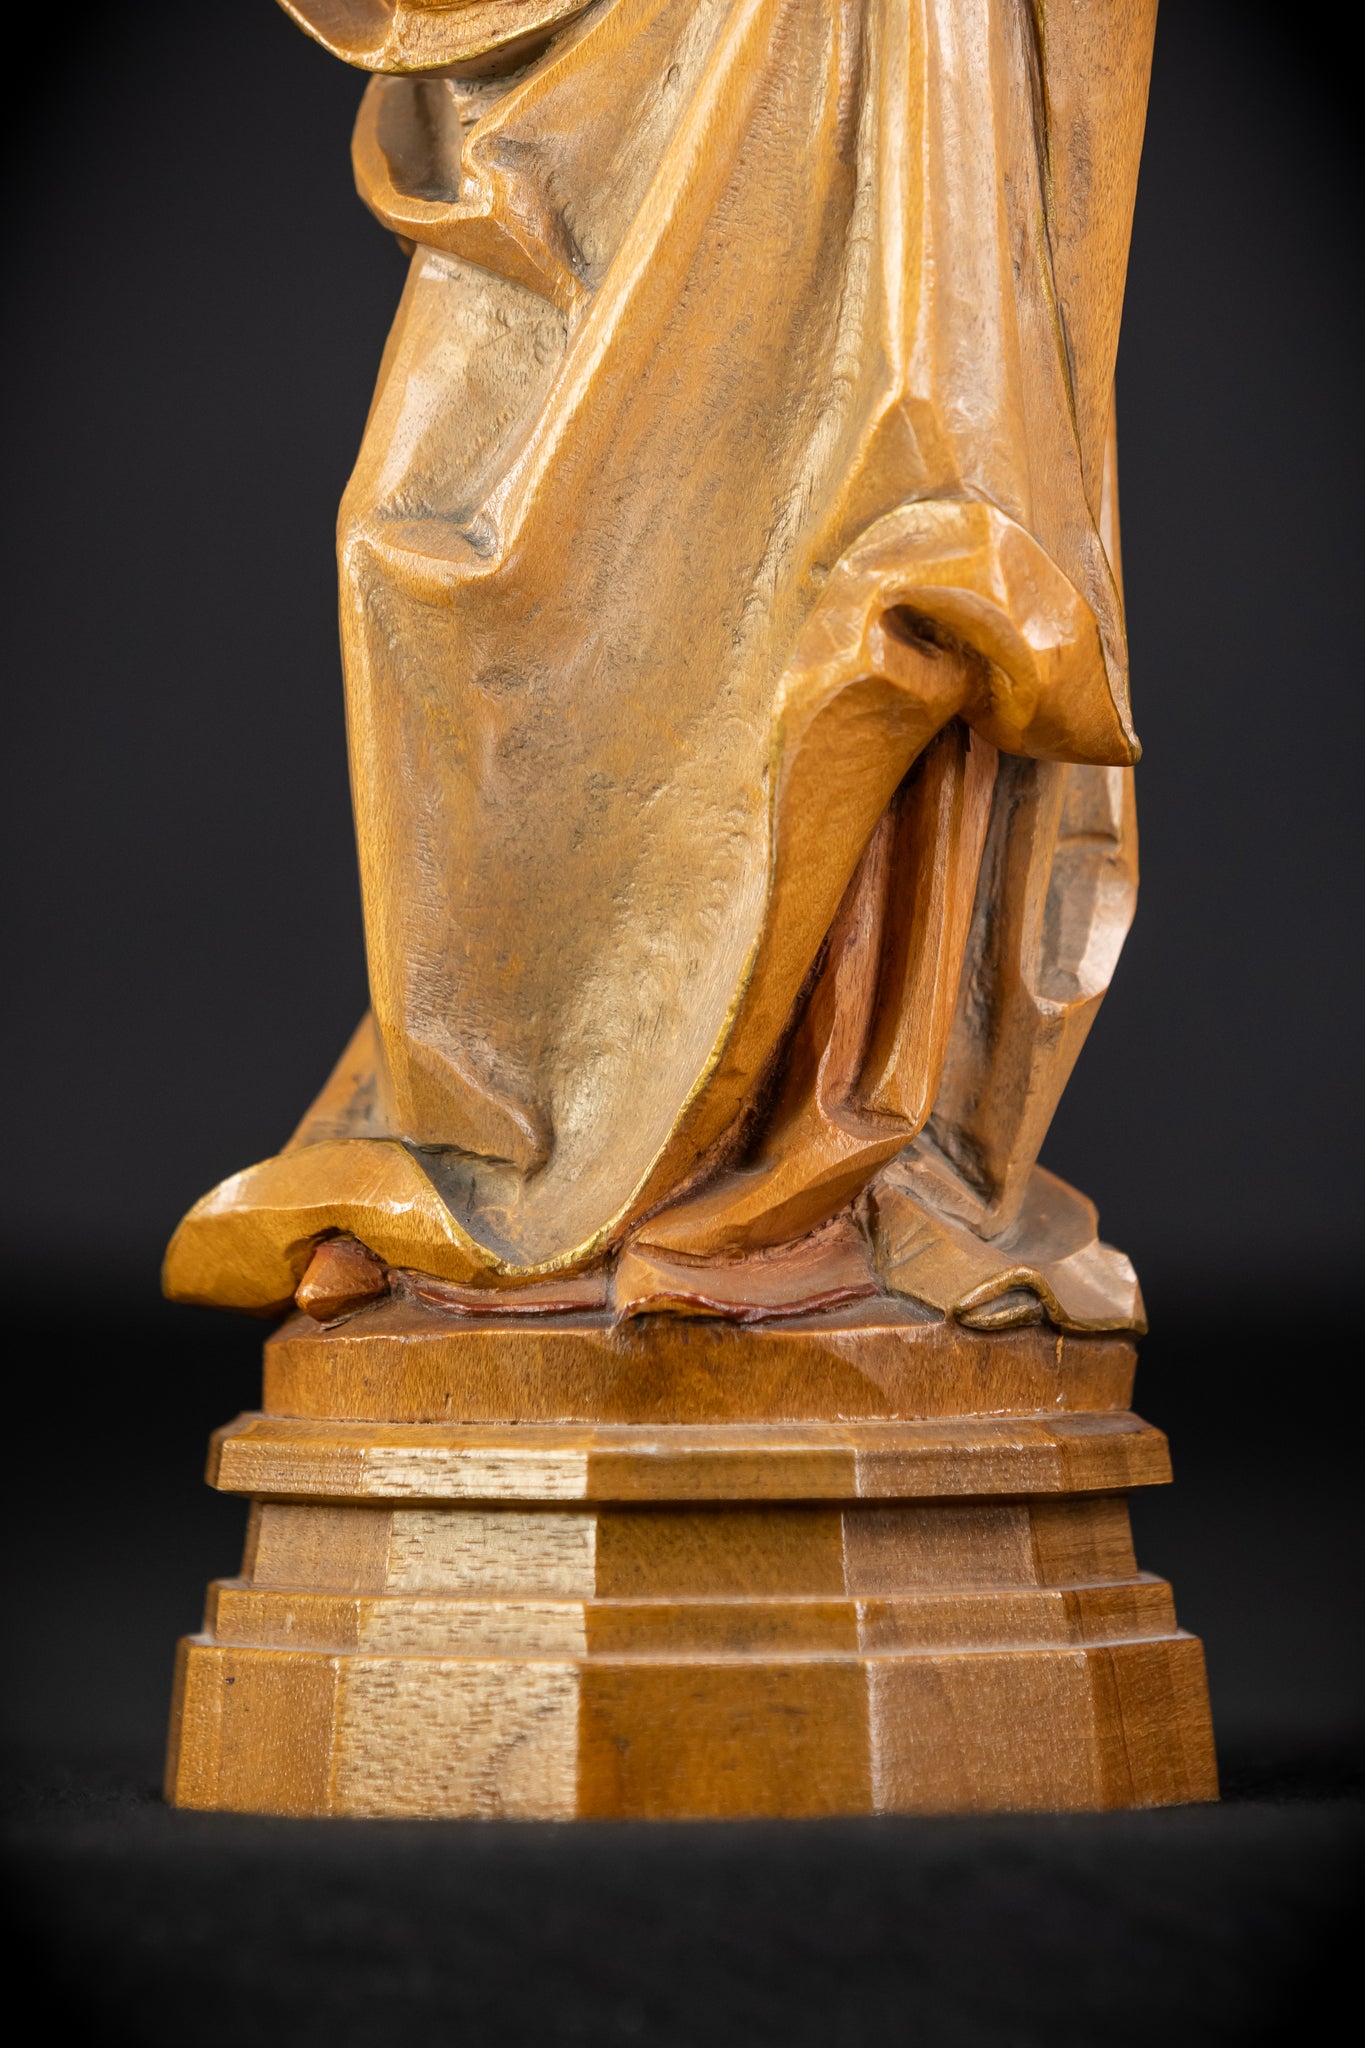 Virgin Mary with Child Jesus Wooden Sculpture | Mid 1900s Vintage | 11” / 28 cm